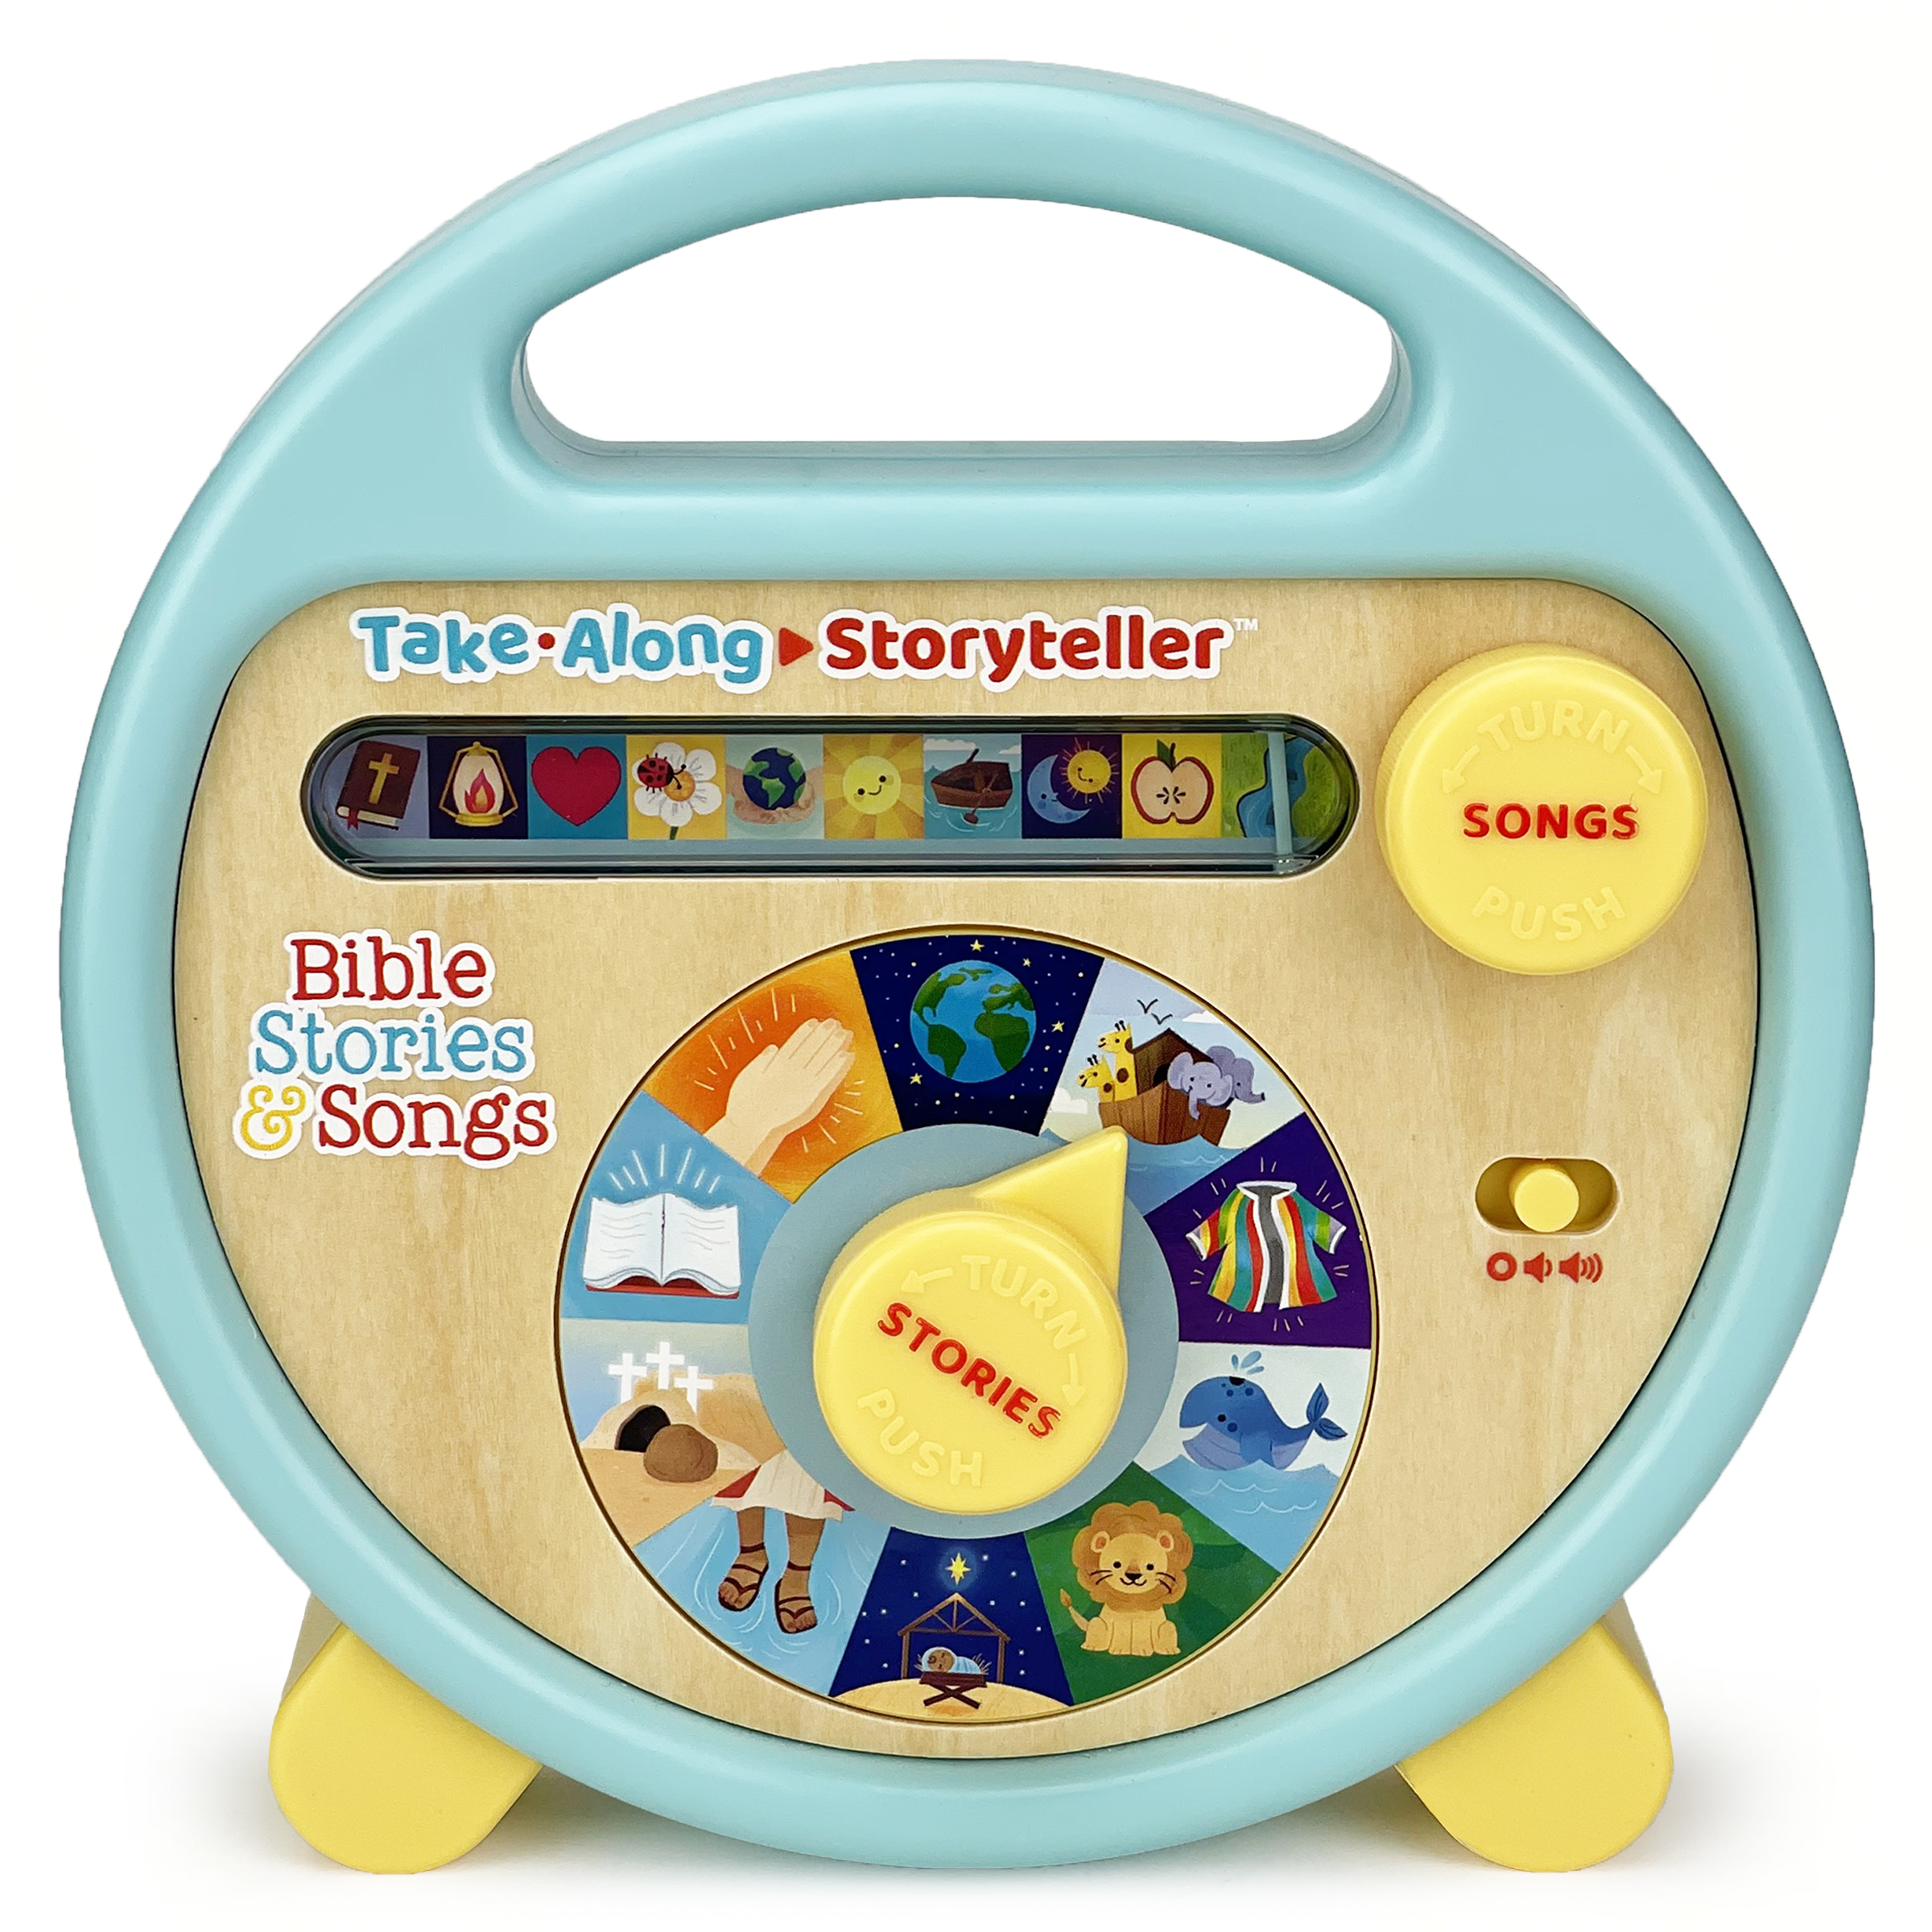 Bible Stories and Songs